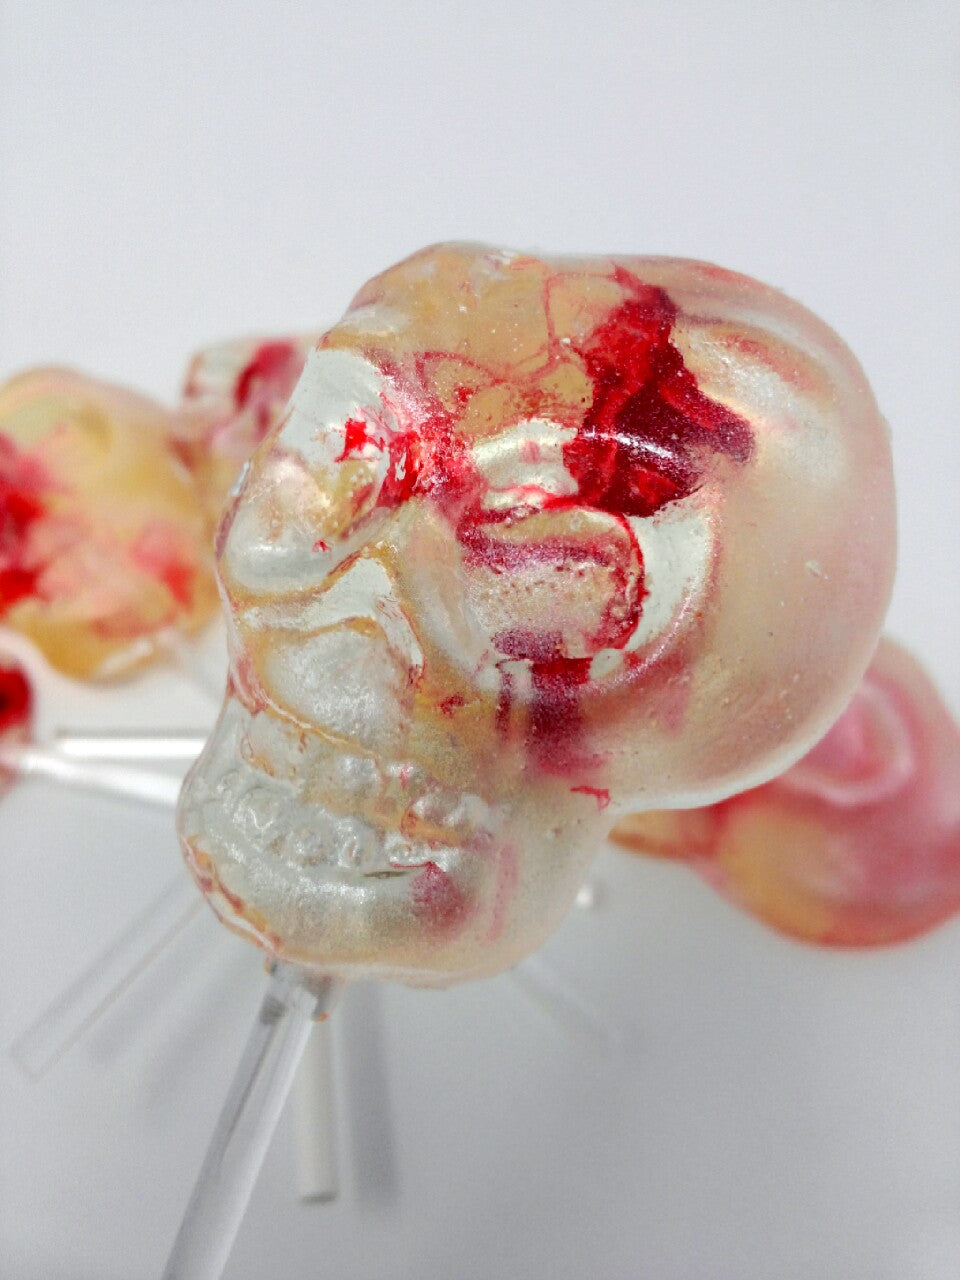 Bloody Skull Halloween Lollipops 6-piece set by I Want Candy!